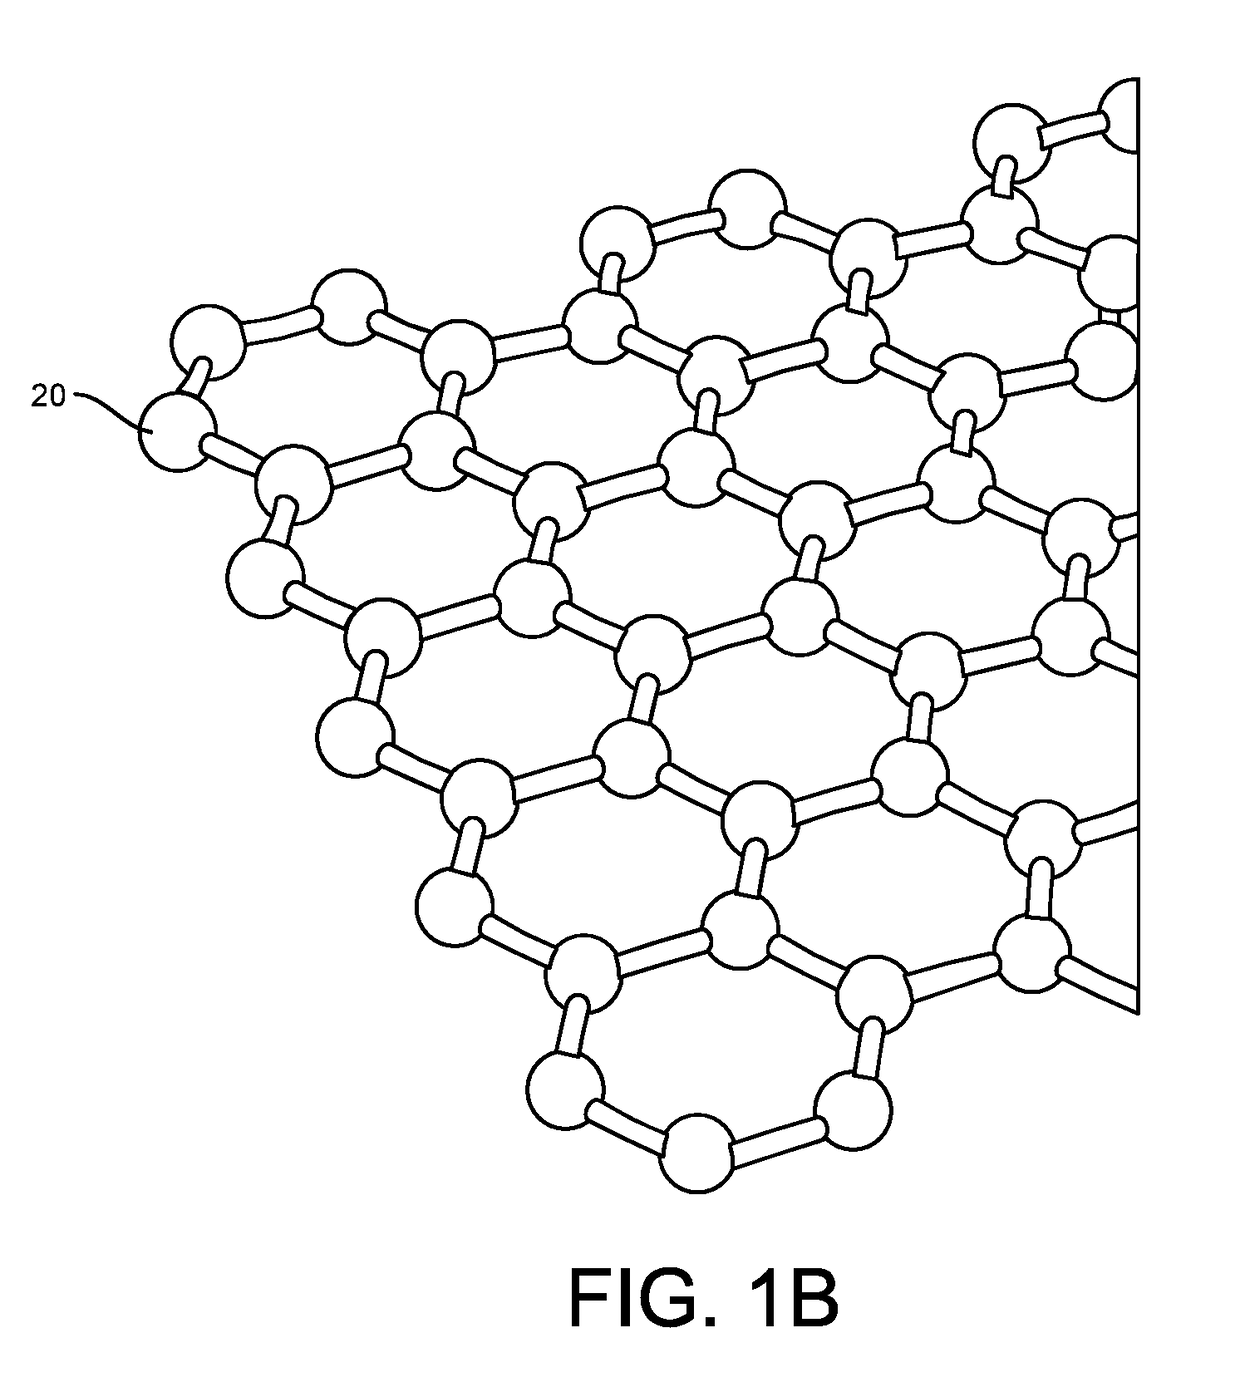 Graphene FET devices, systems, and methods of using the same for sequencing nucleic acids